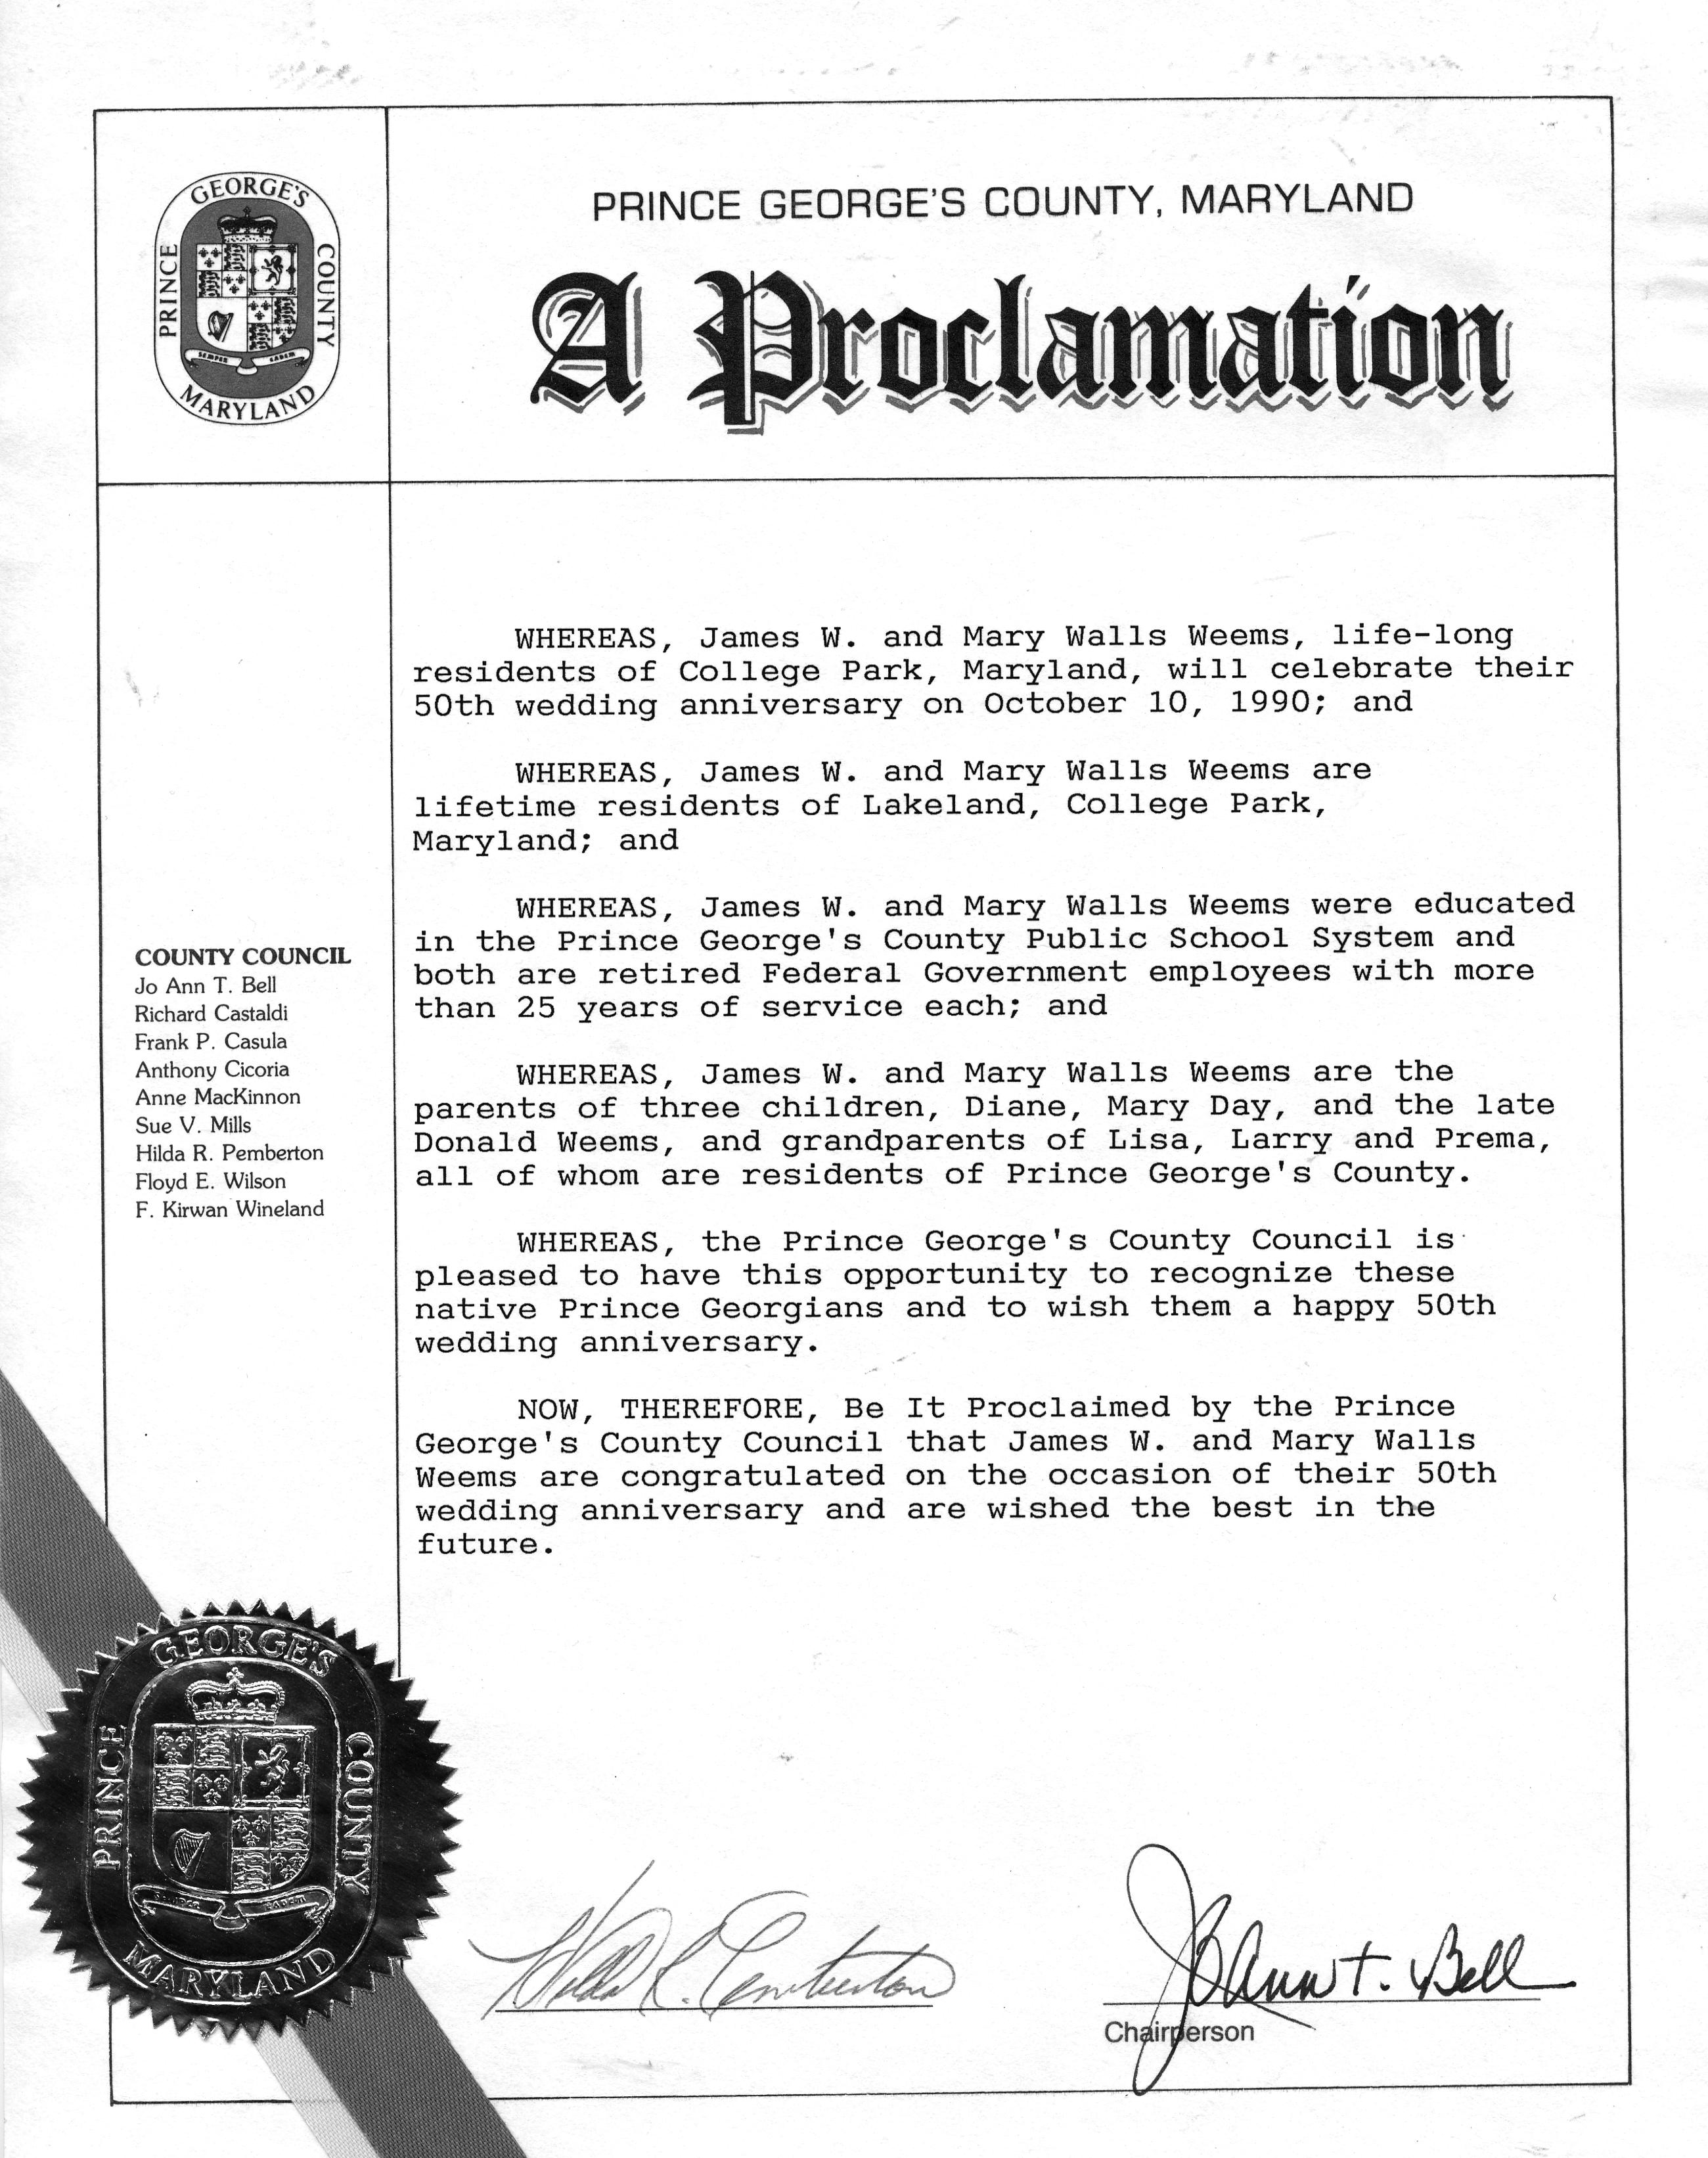 Prince George's County Proclamation 